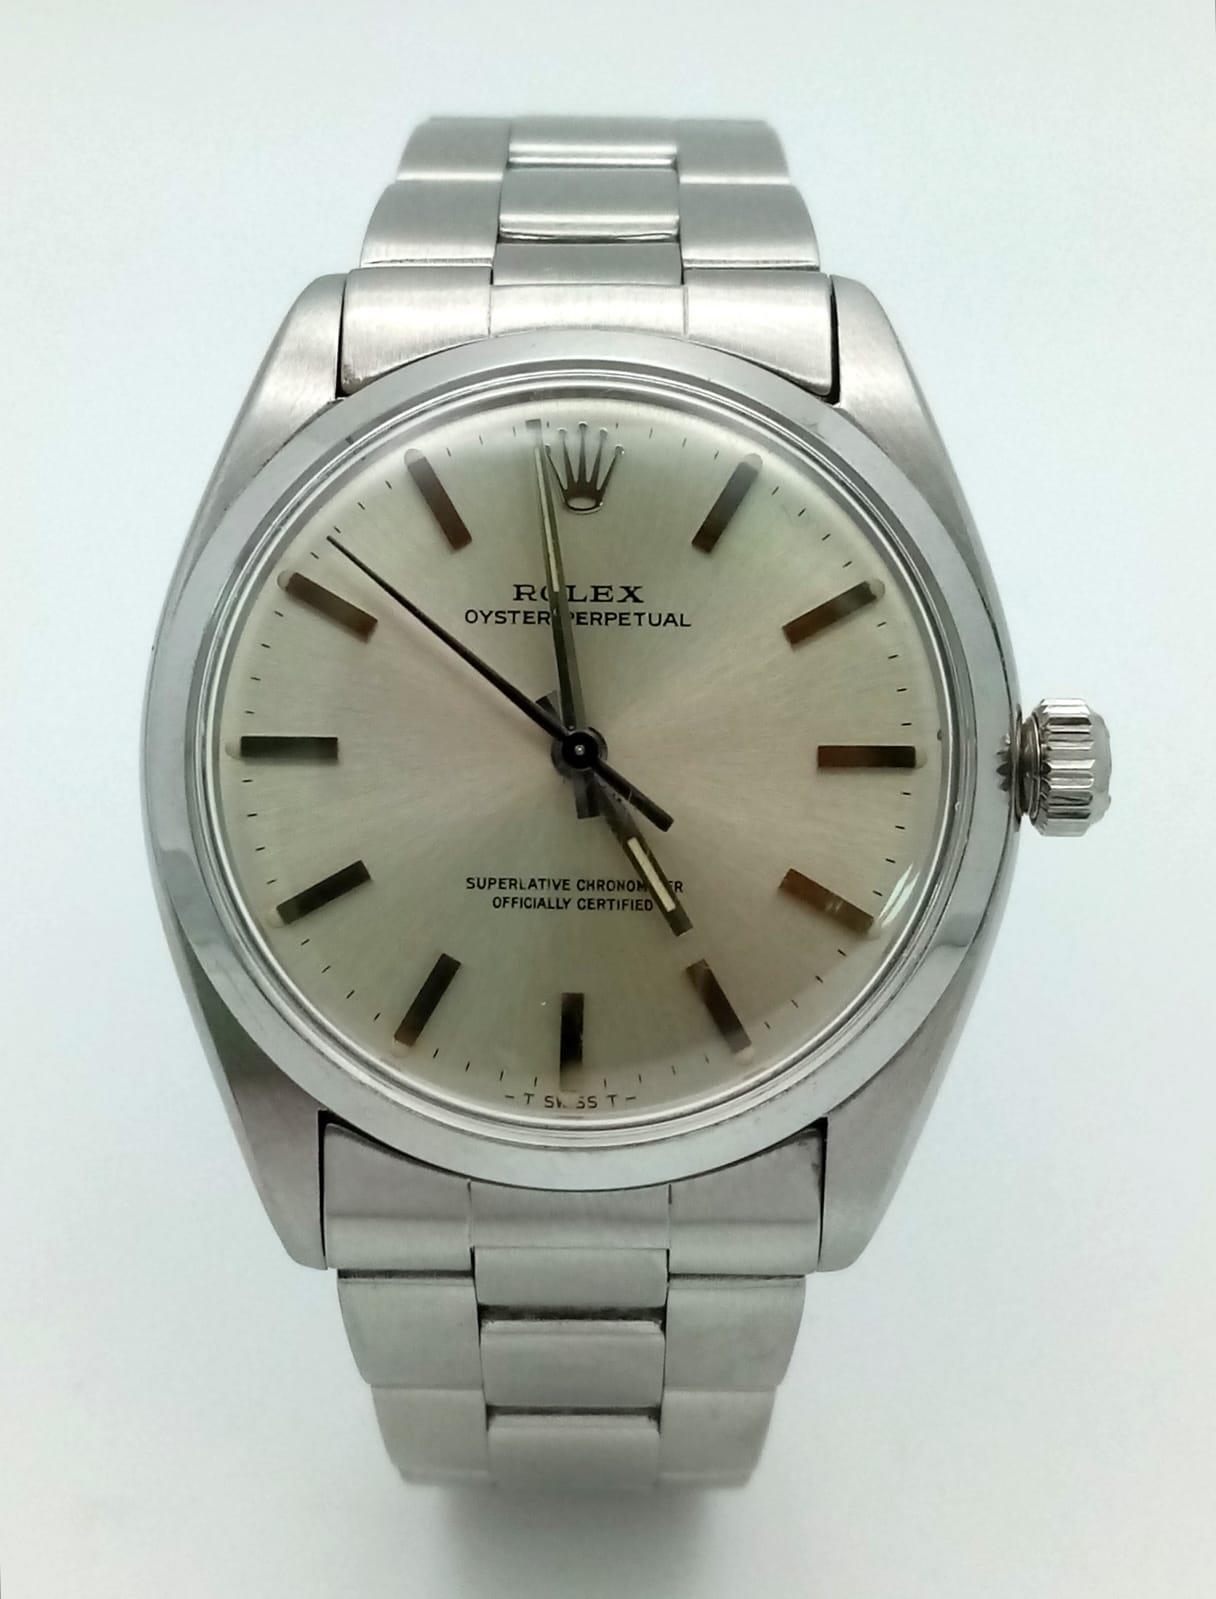 A Vintage Rolex Oyster Perpetual Gents Watch. Stainless steel bracelet and case - 34mm. Automatic - Image 2 of 9